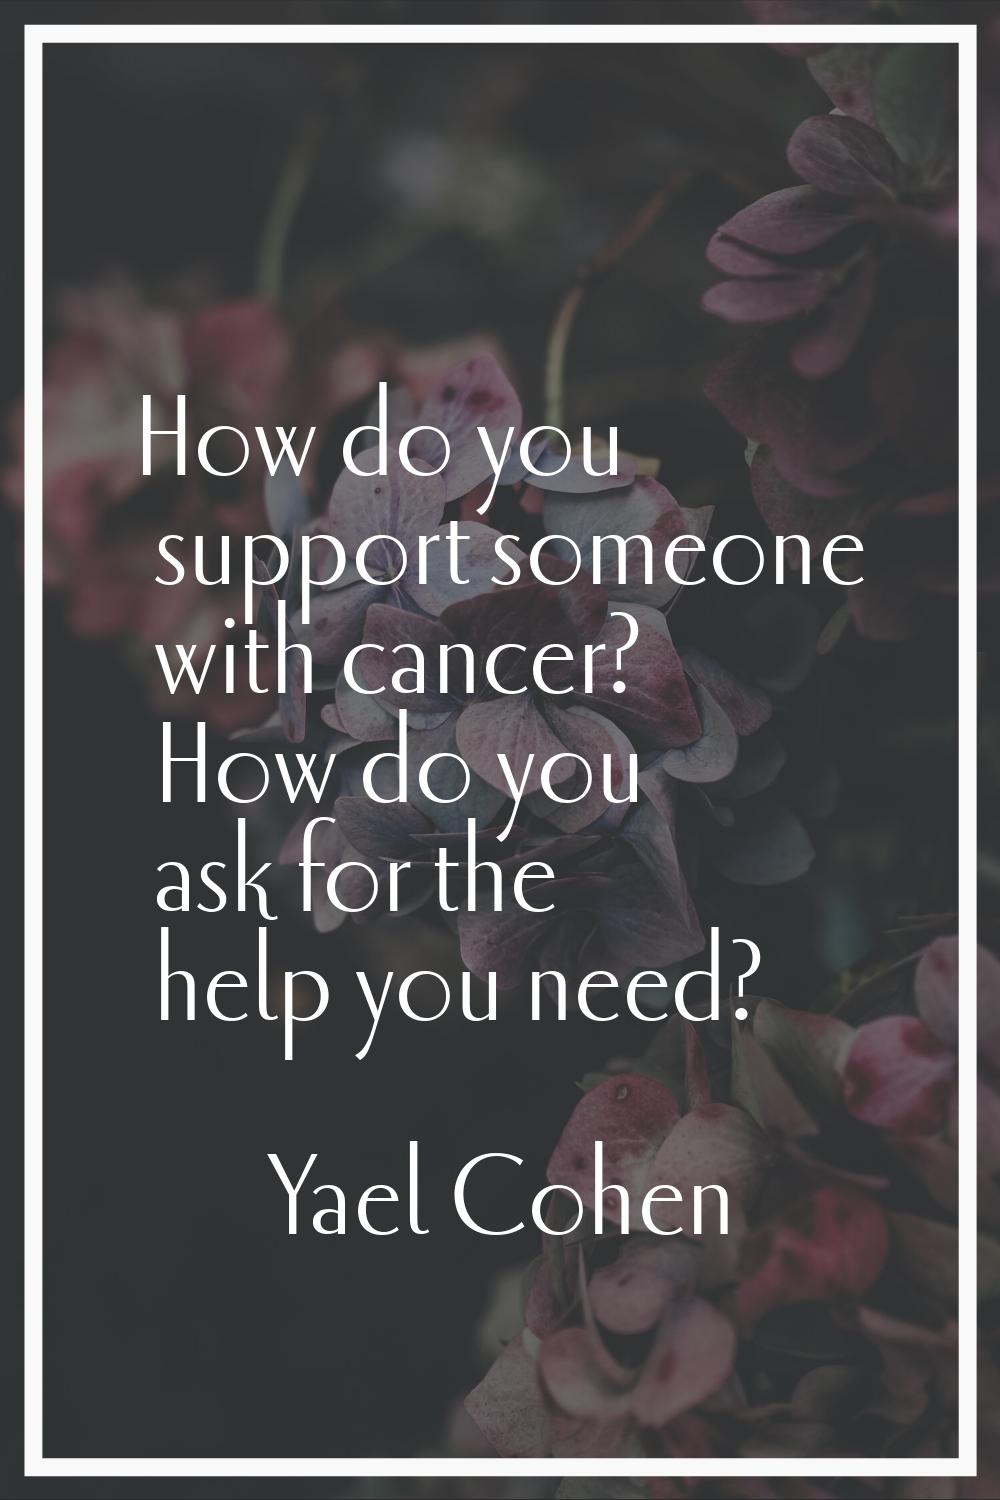 How do you support someone with cancer? How do you ask for the help you need?